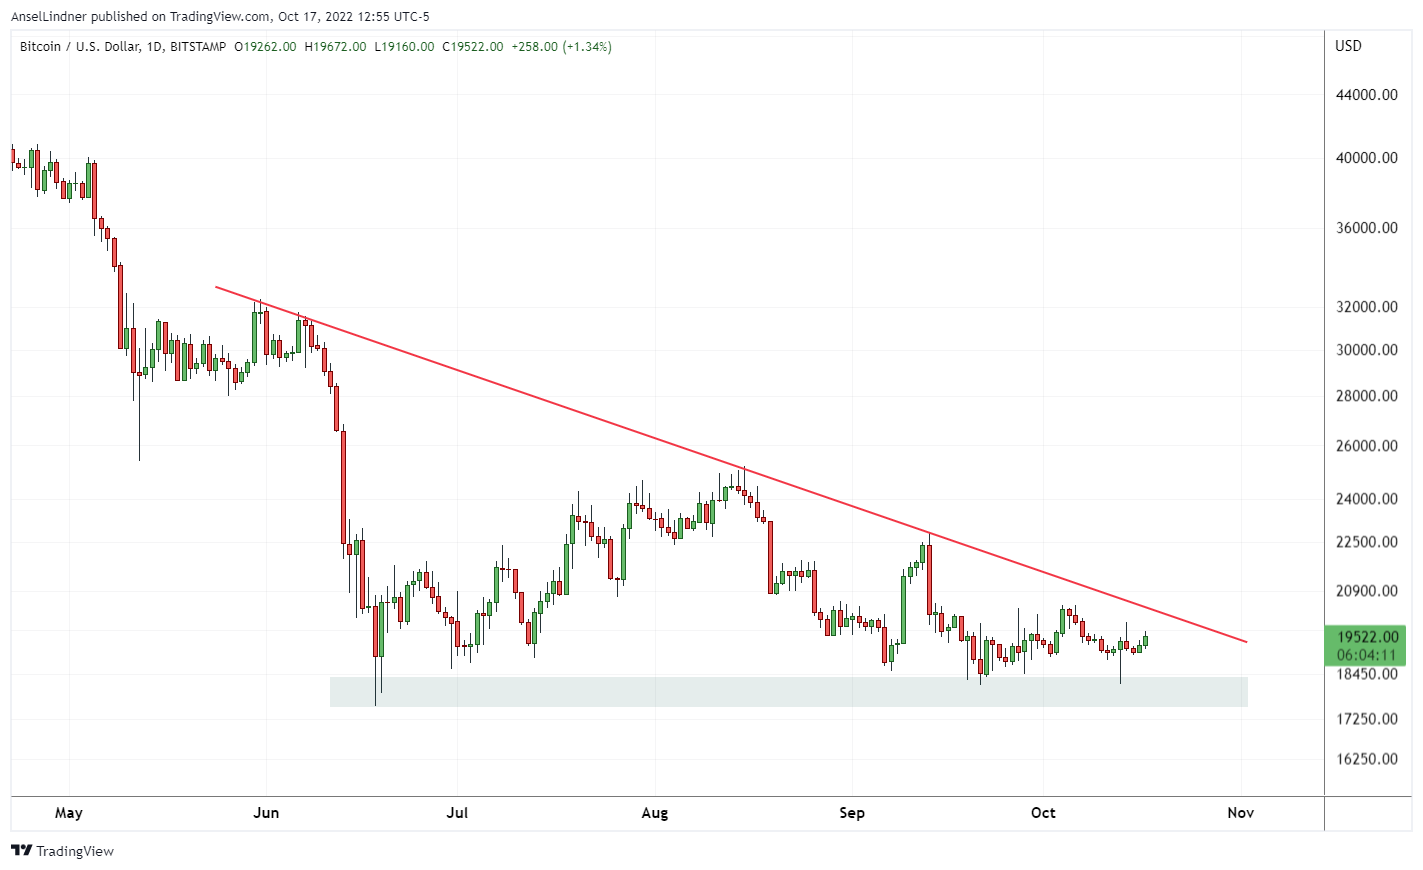 bitcoin daily chart showing trend resistance and support